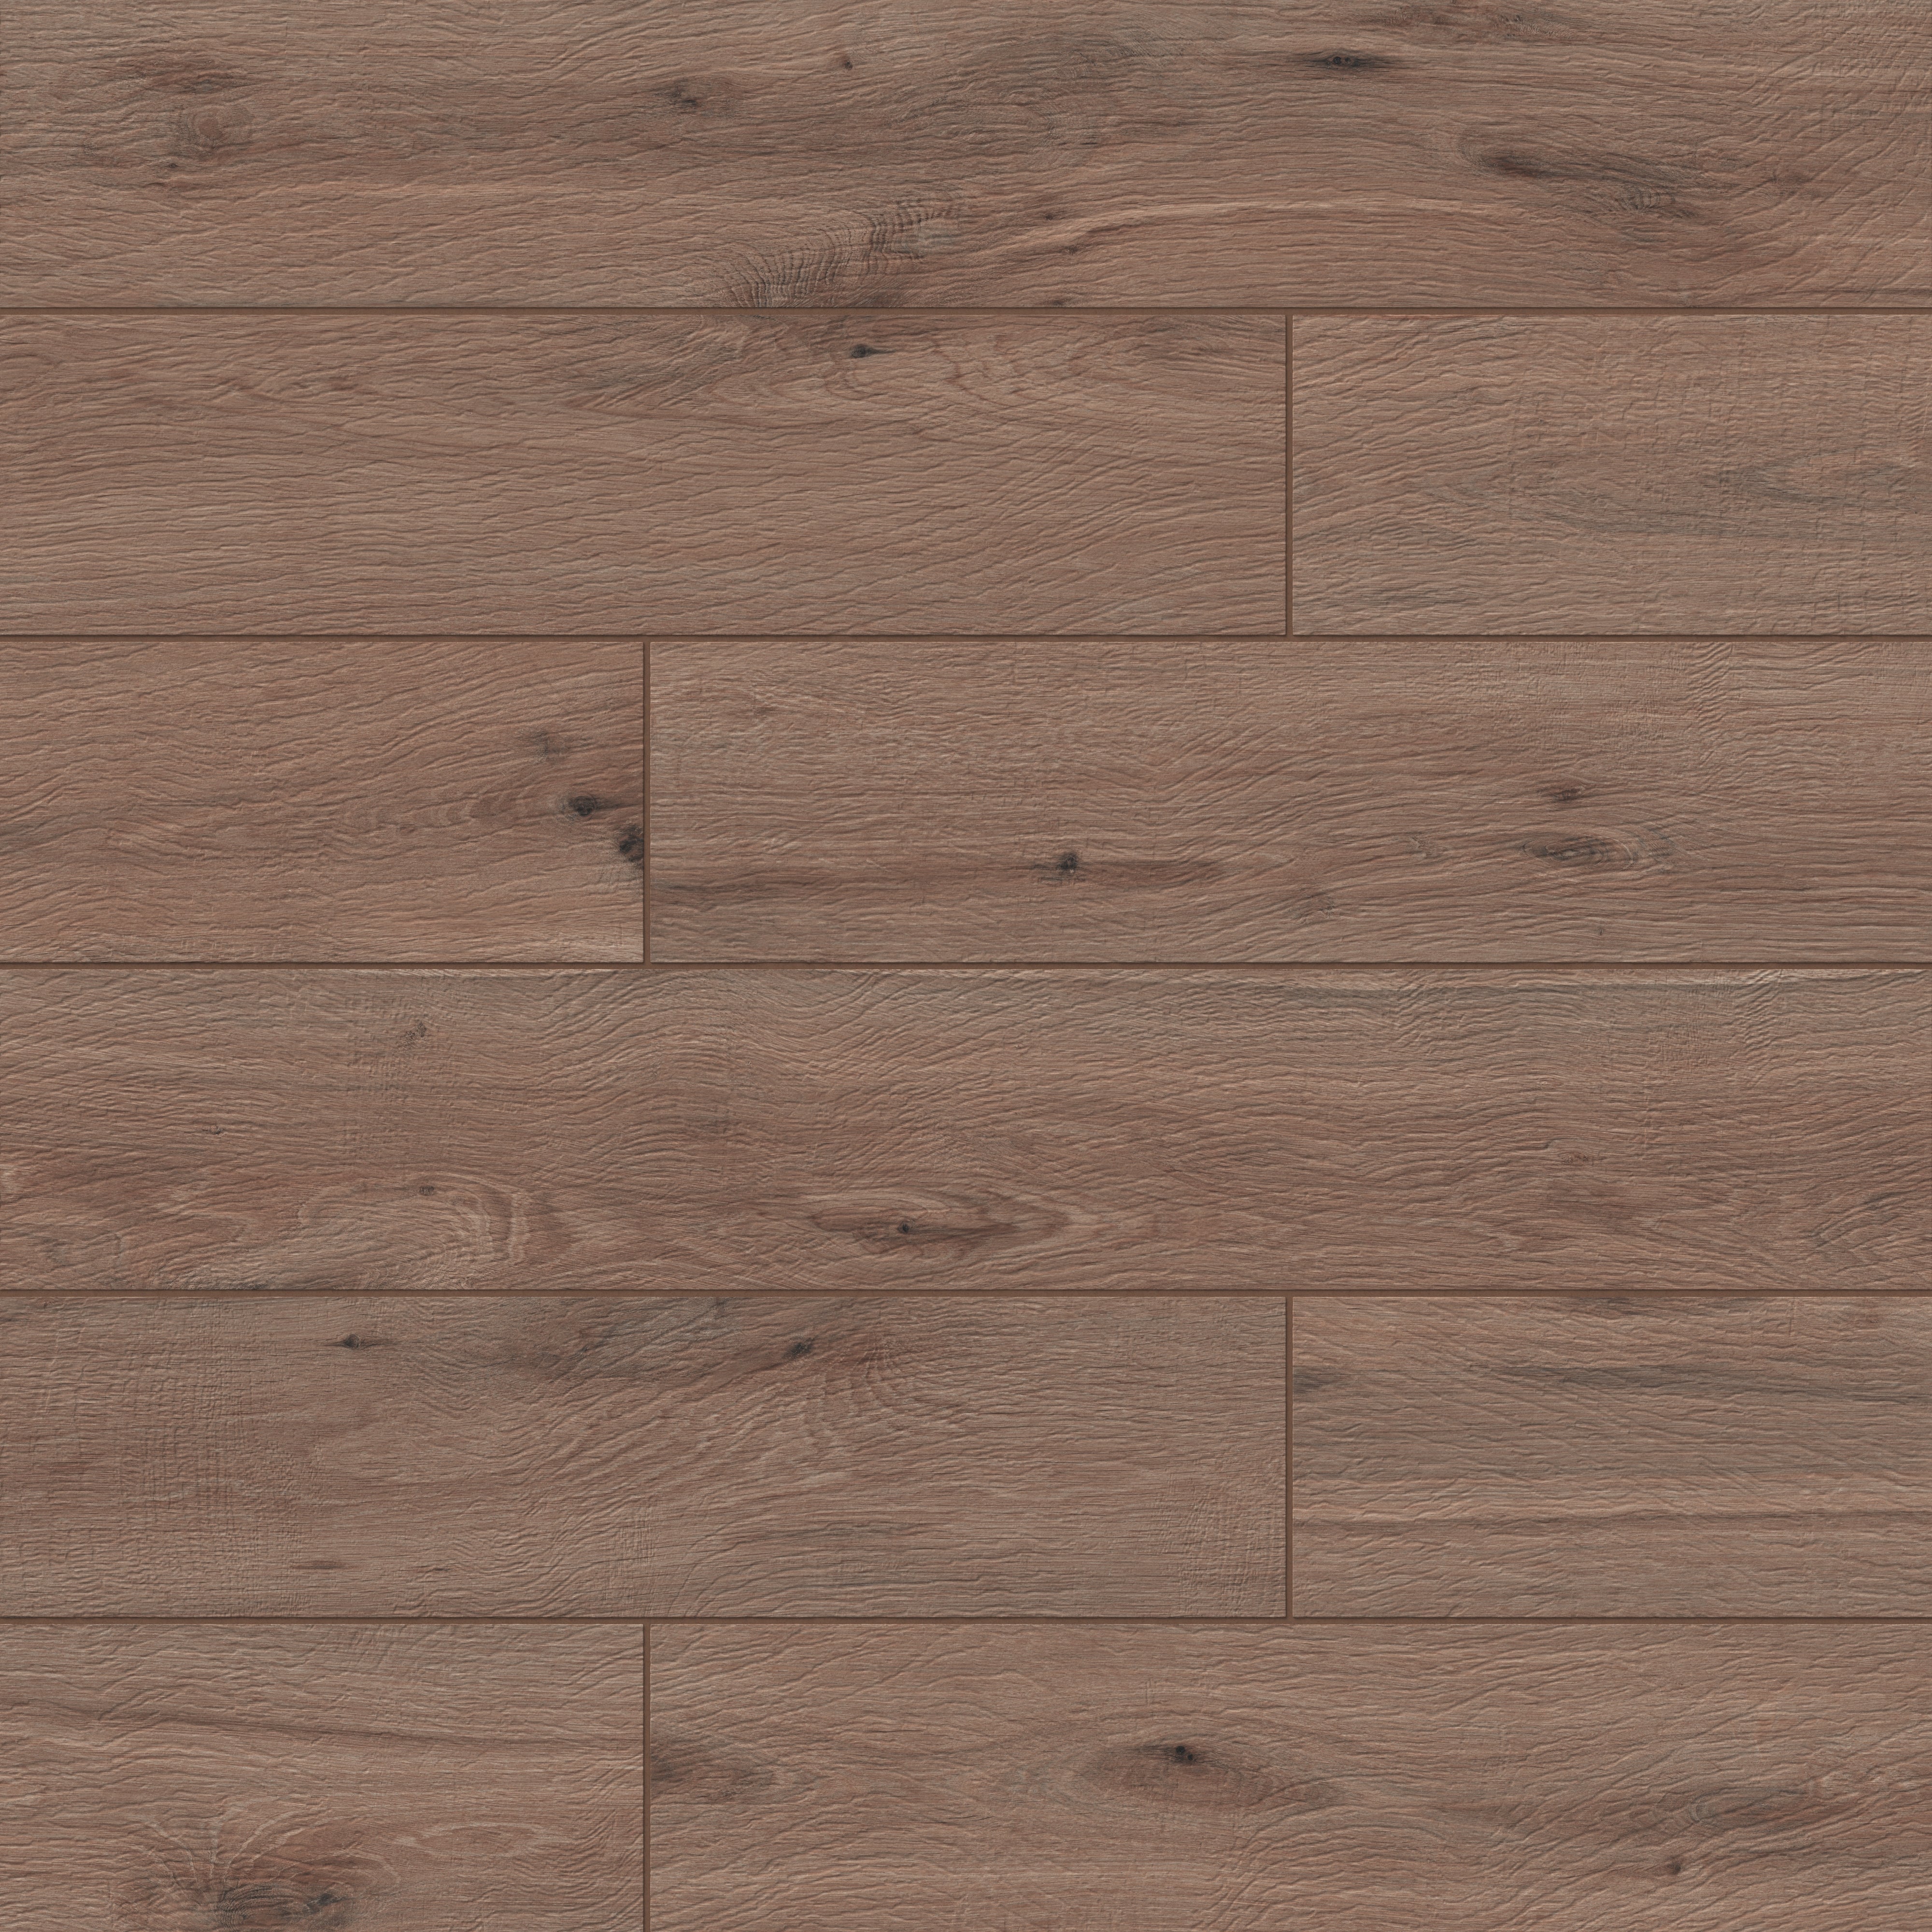 Preston collection porcelain plank in Chestnut, highlighting the depth of its wood grain and timeless allure.